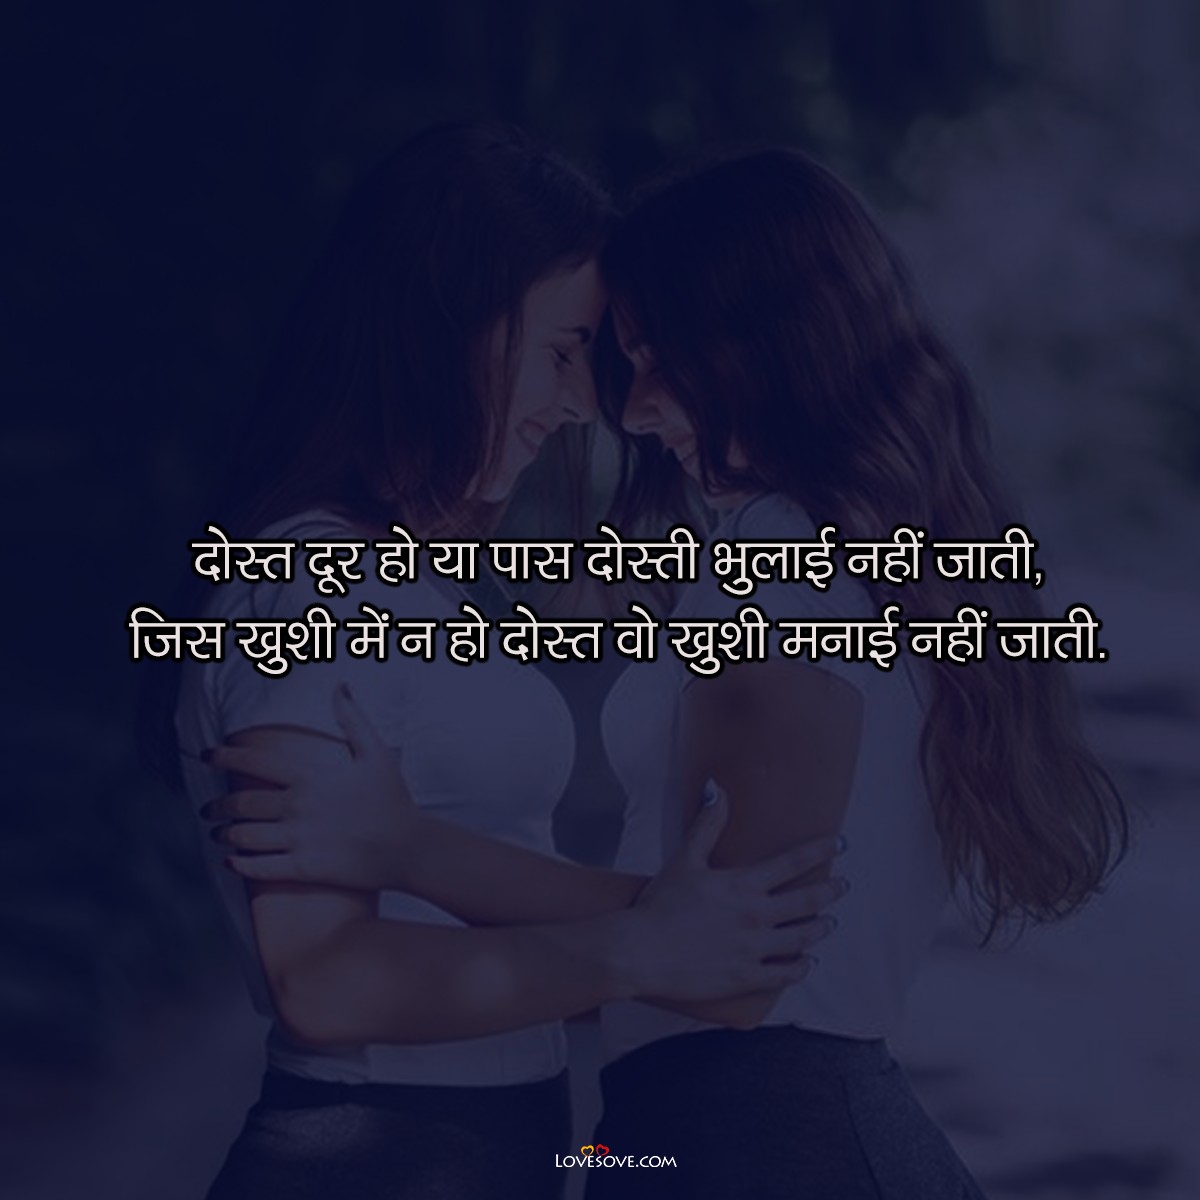 Emotional Quotes and Shayari, love and emotional quotes